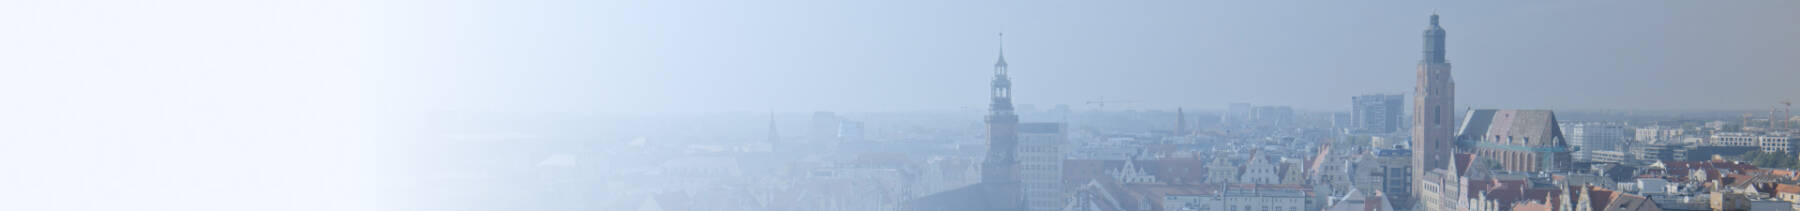 Wroclaw panorama banner